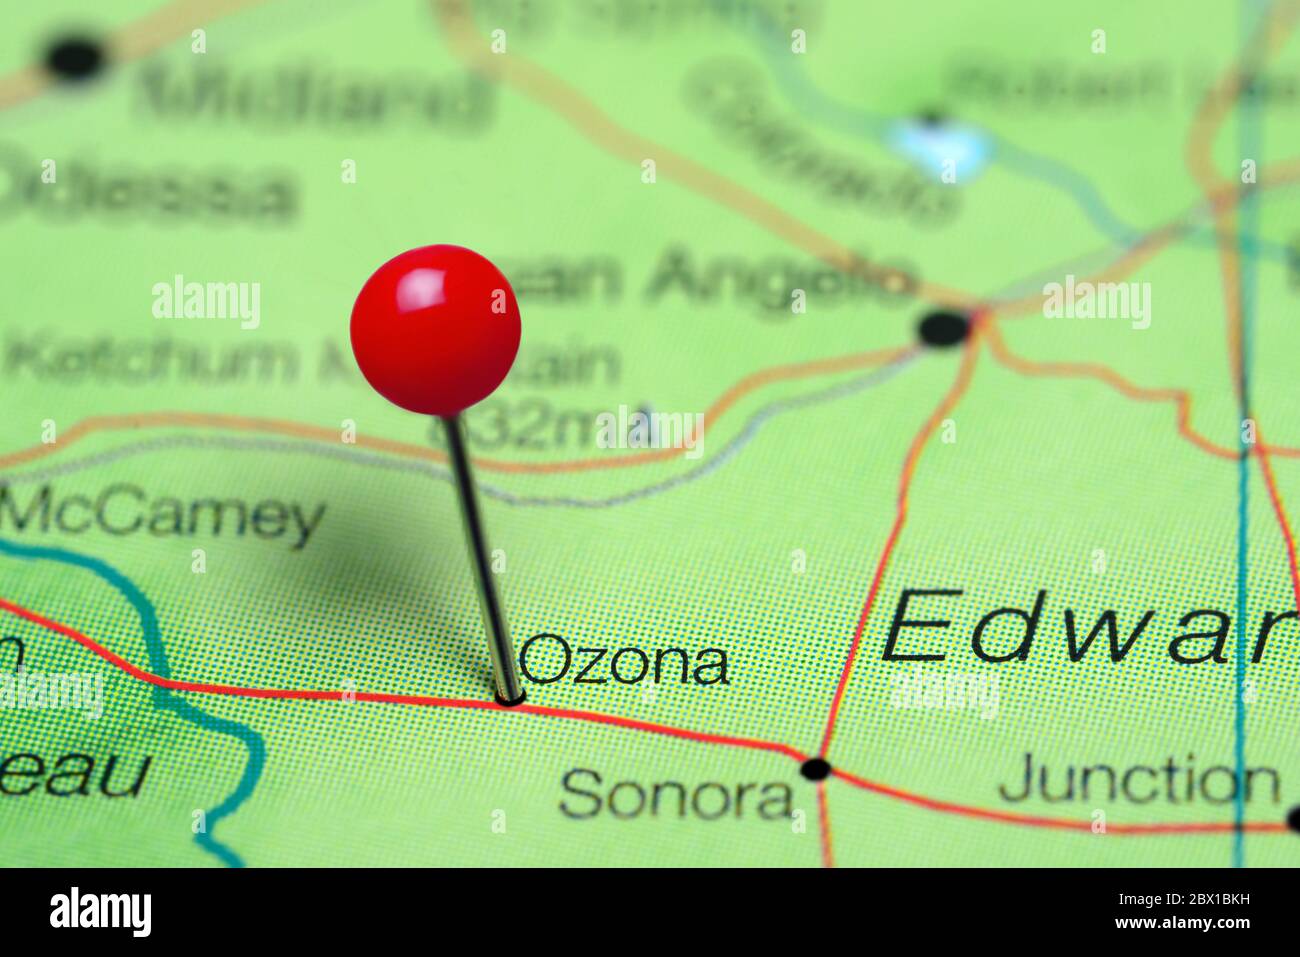 Ozona pinned on a map of Texas, USA Stock Photo